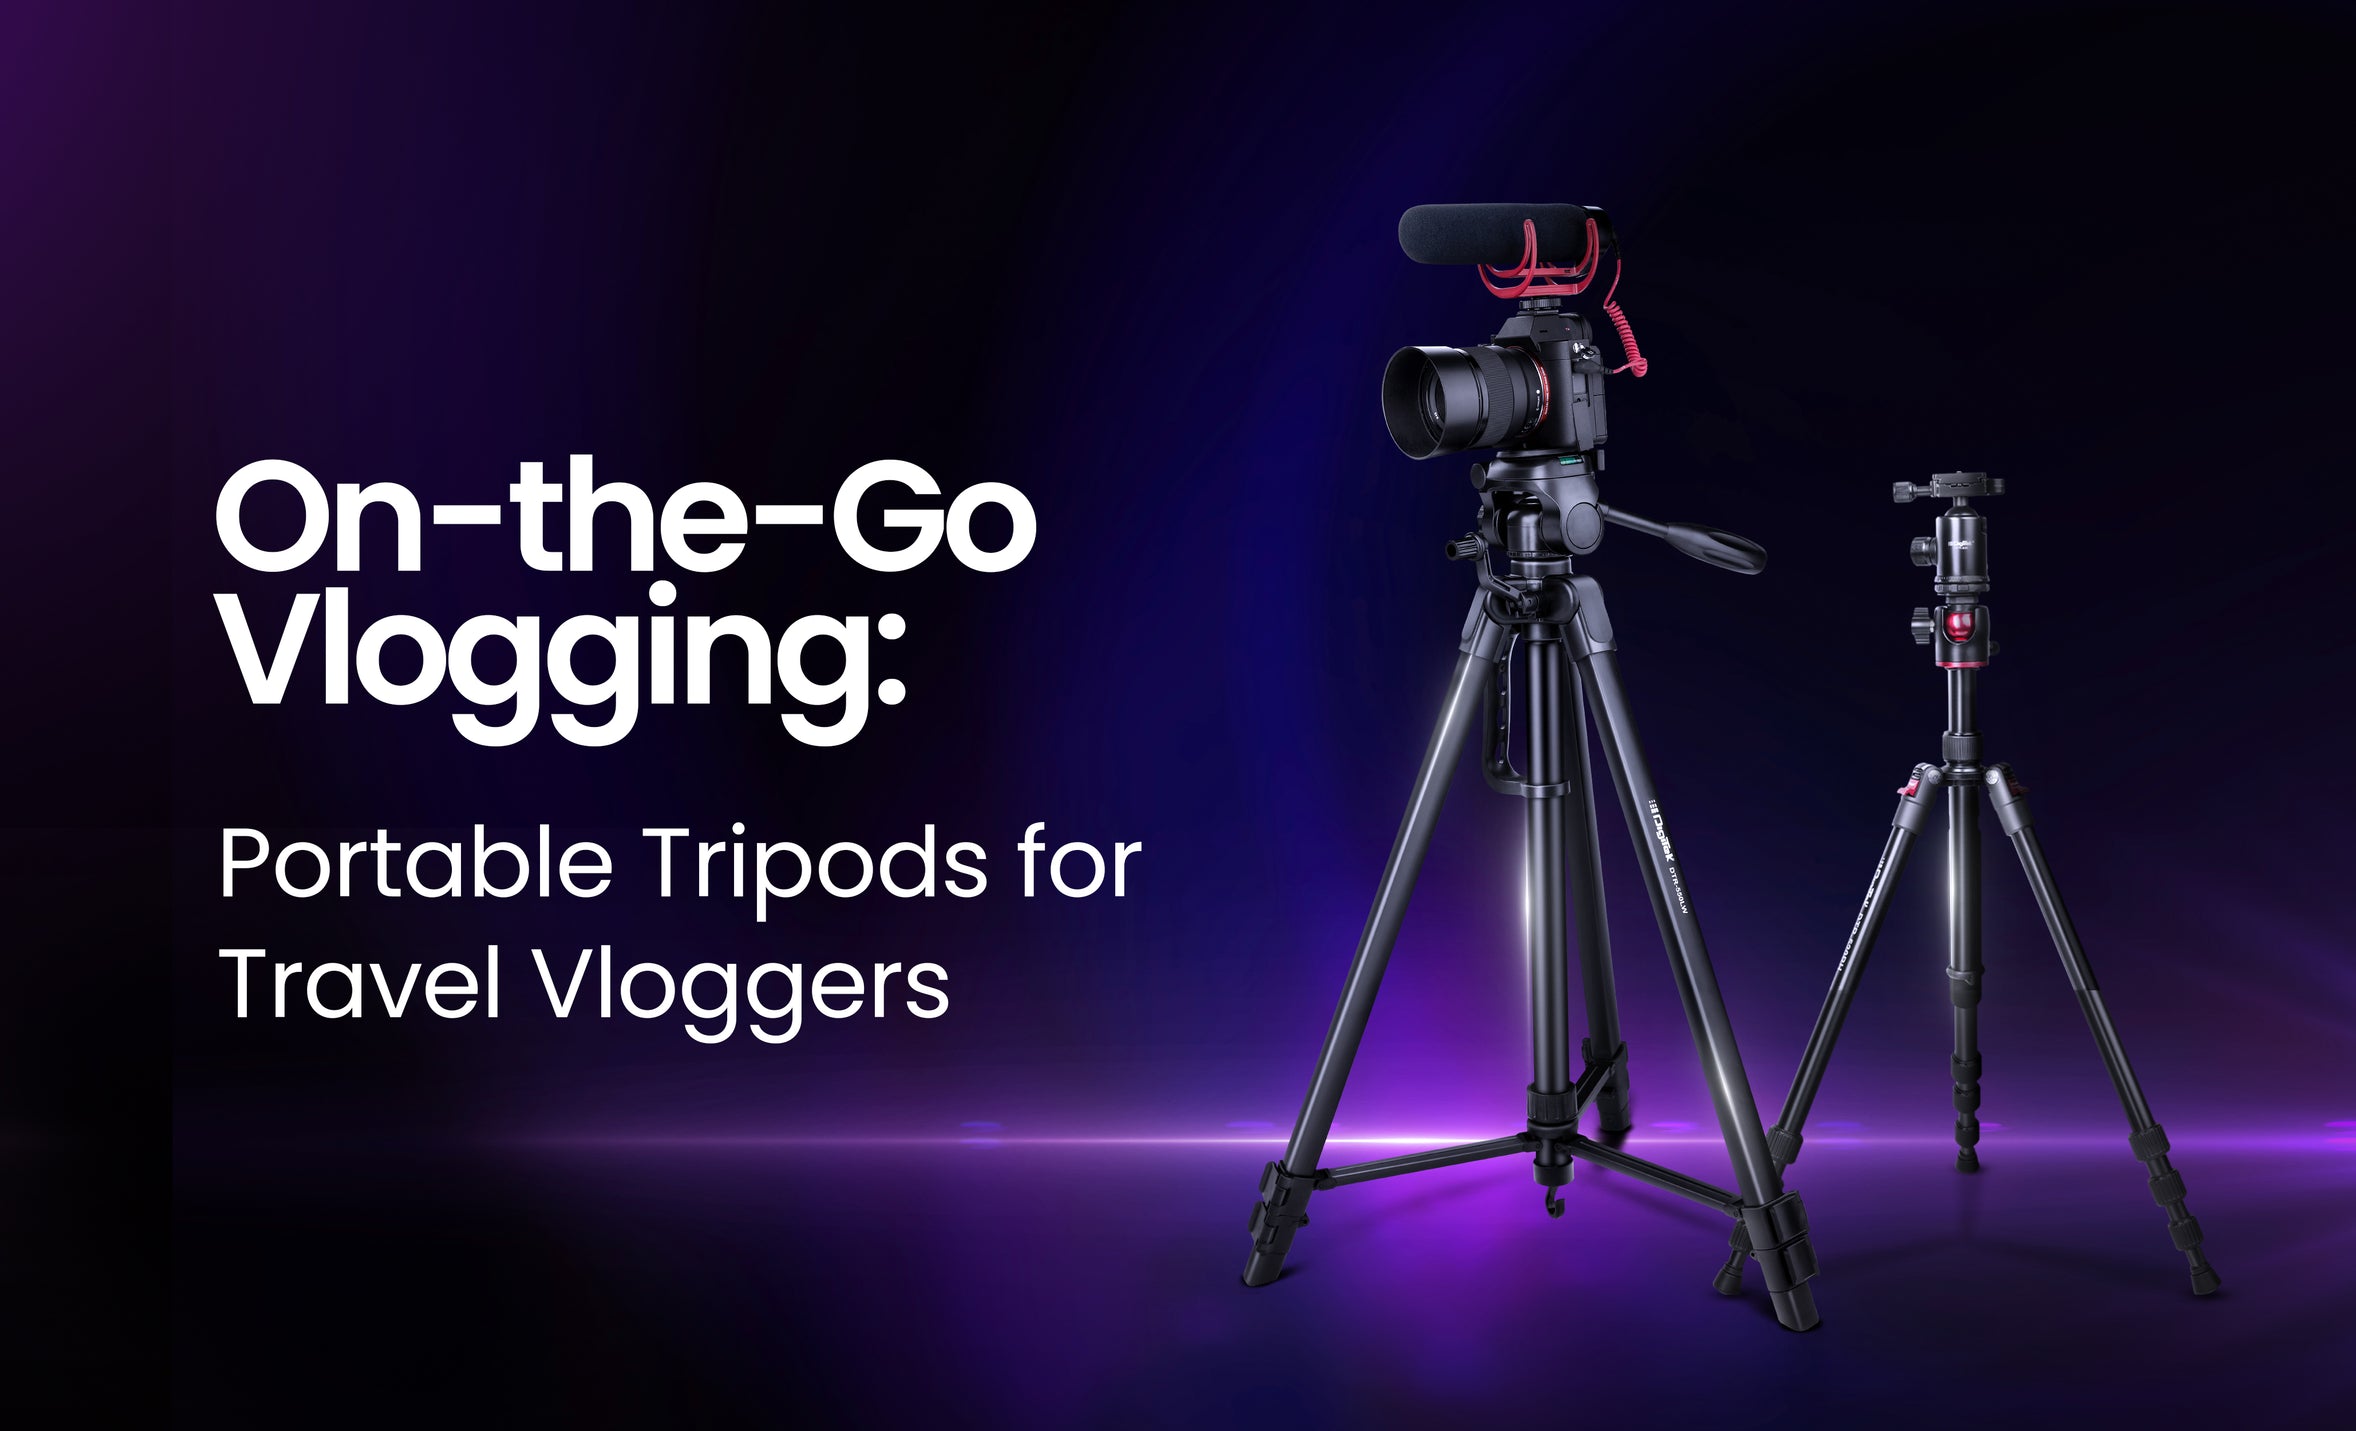 On-the-Go Vlogging: Portable Tripods for Travel Vloggers